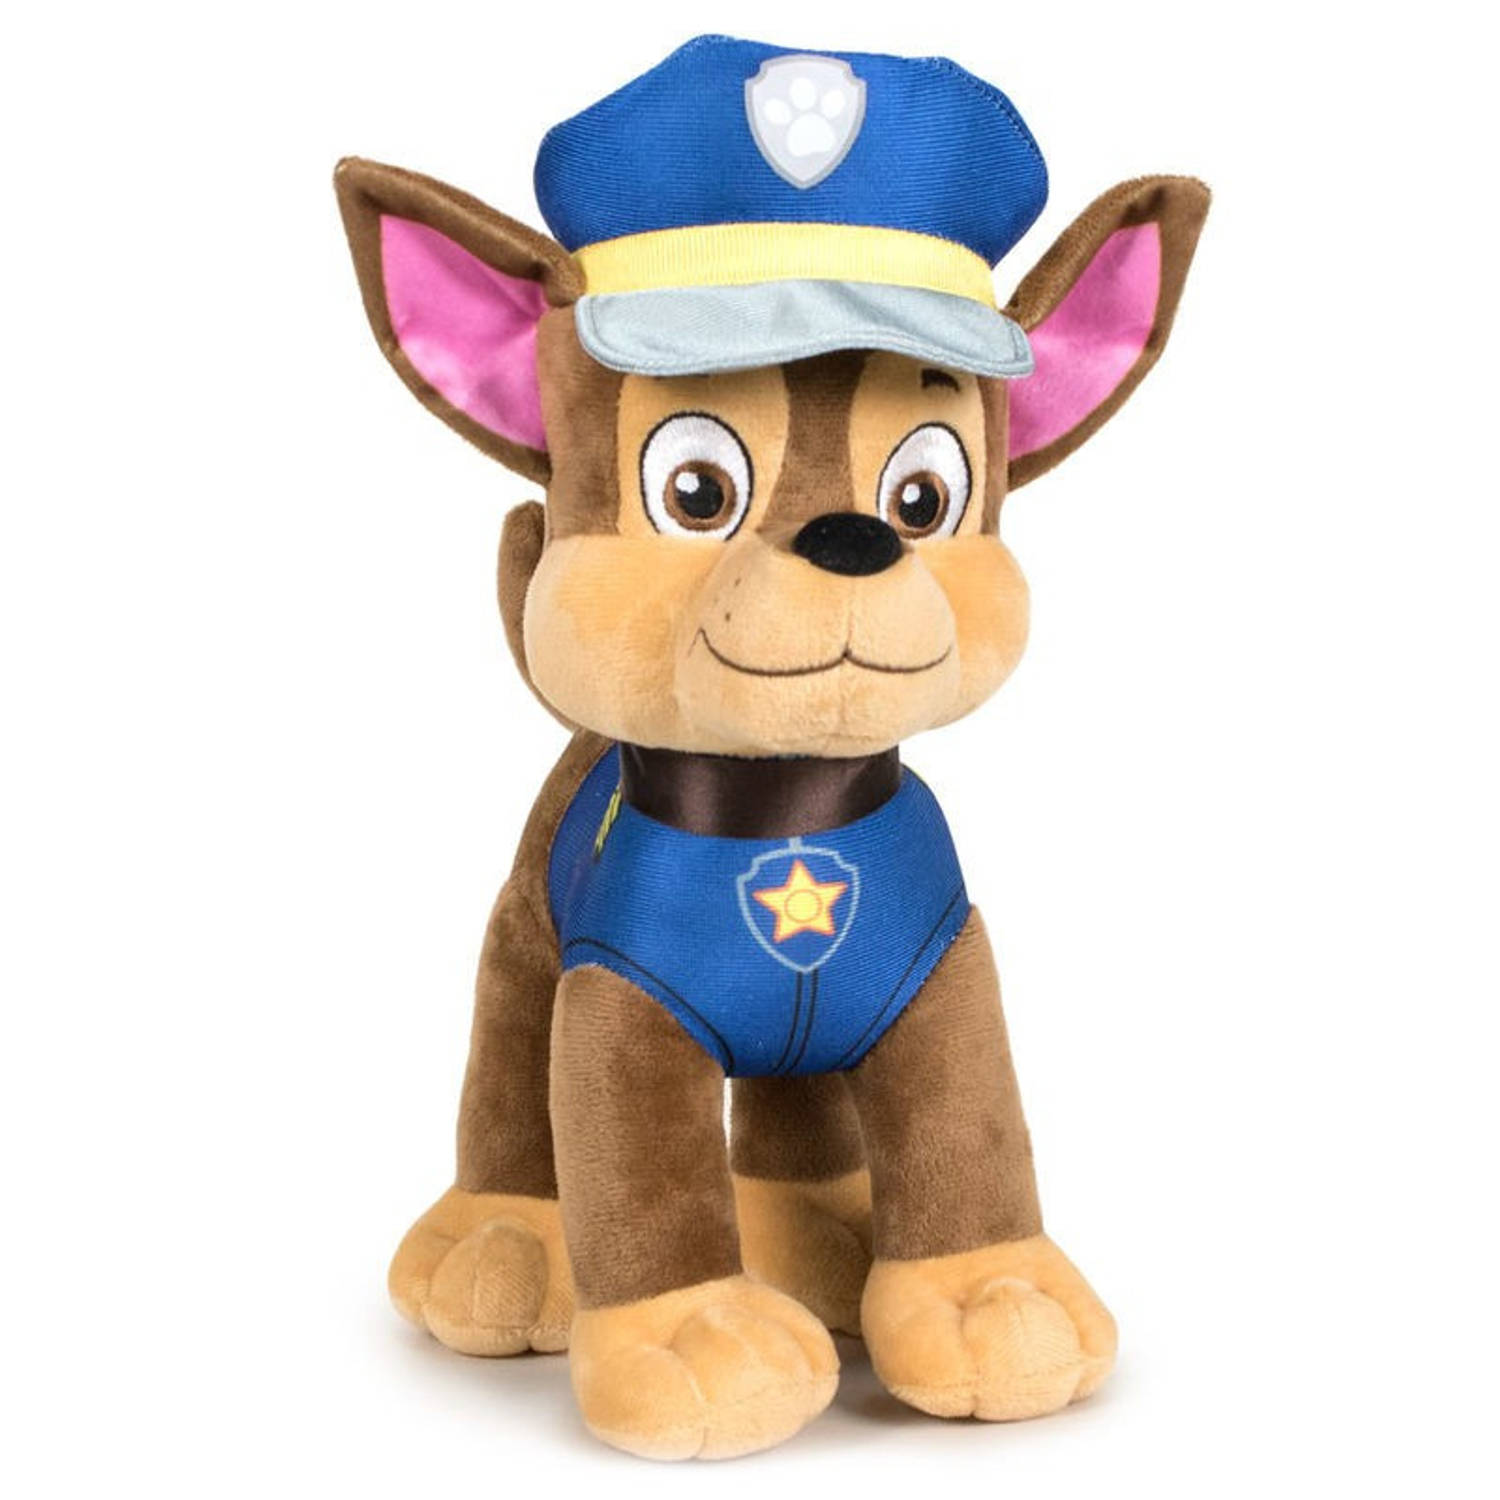 Pluche Paw Patrol Knuffel Chase Classic New Style 27 Cm Cartoon Knuffels Speelgoed Voor Kinderen